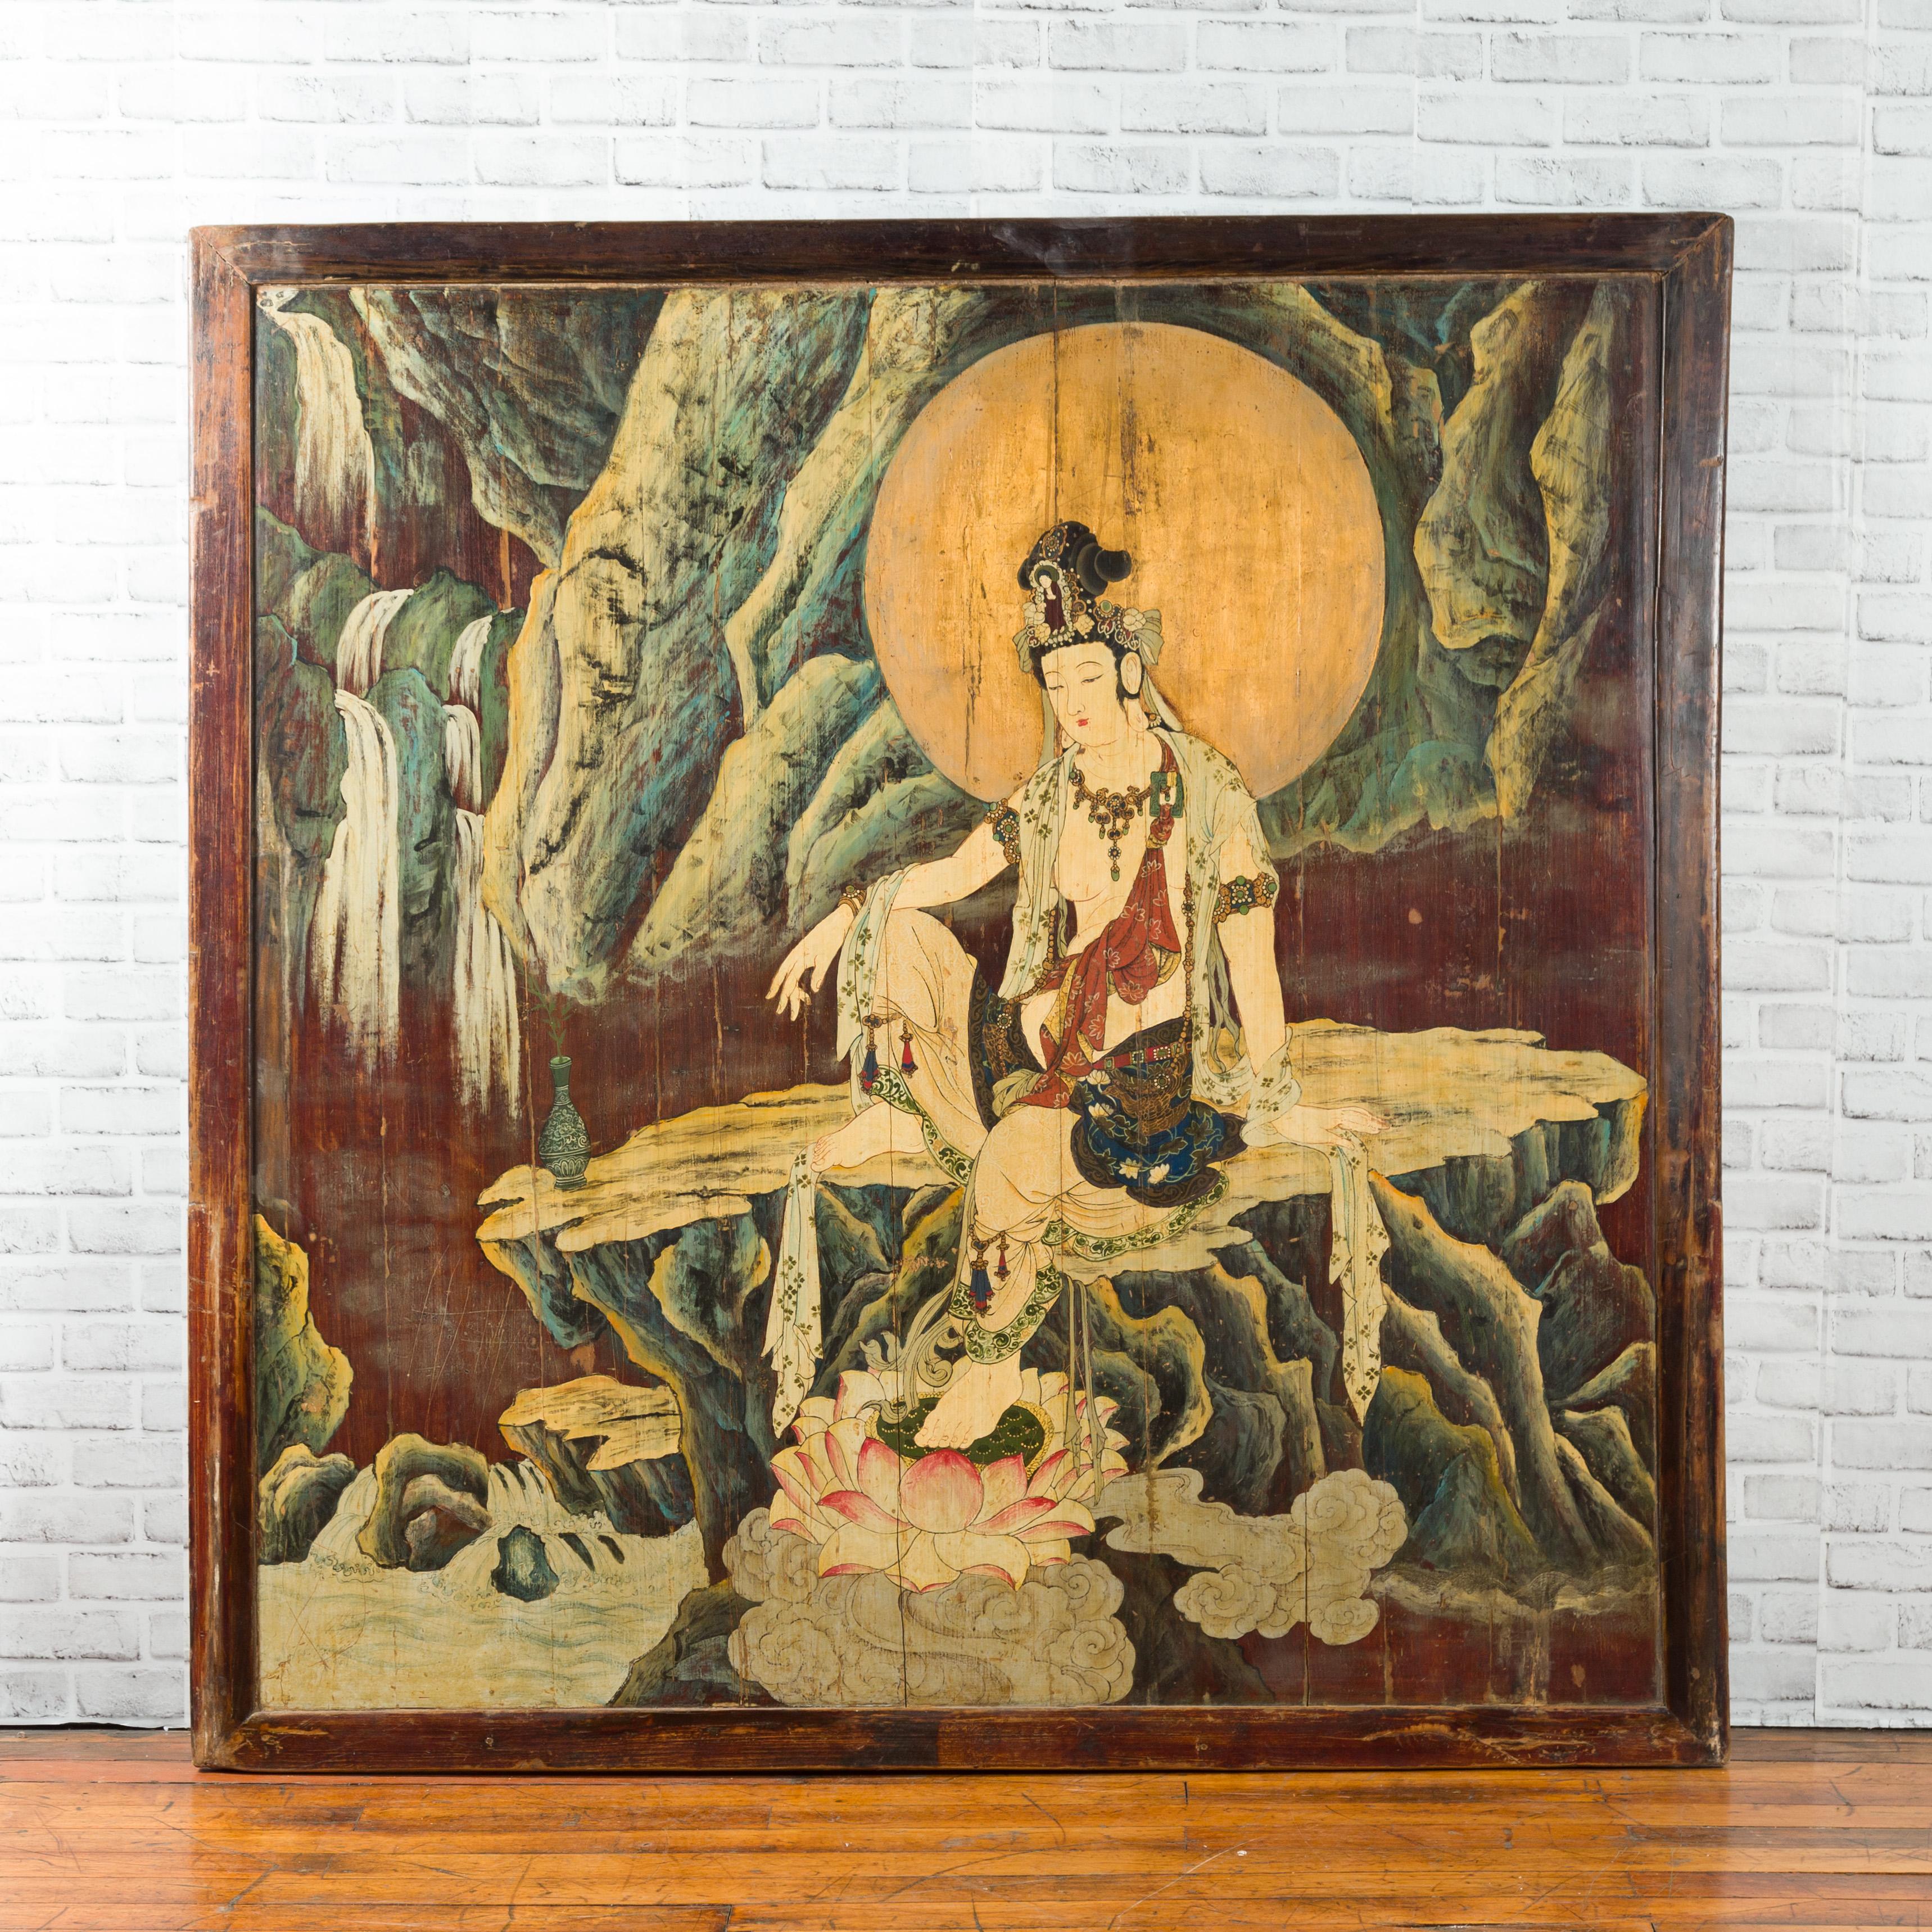 An antique Chinese unusual large hand painted two-sided elm divider depicting Guanyin and Zhong Kui, from the first half of the 20th century. Handcrafted in China, this large rectangular elmwood screen divider is painted with numerous colors on a